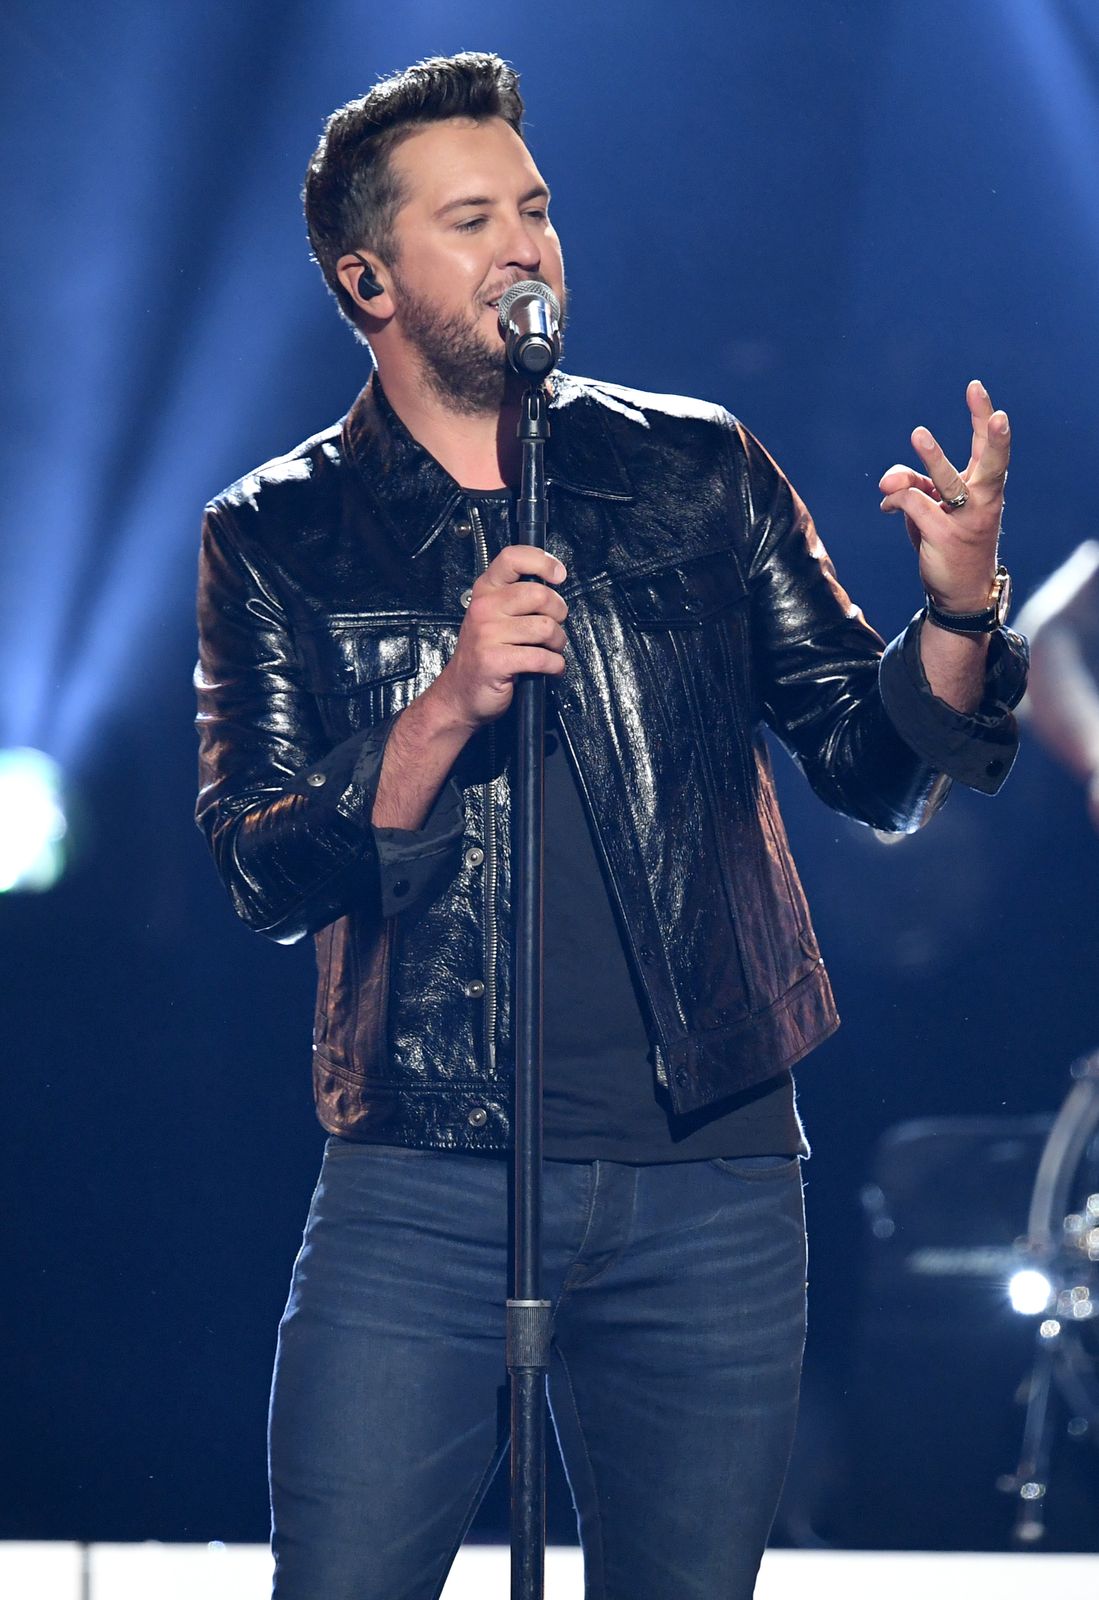 Luke Bryan performs during the 54th Academy Of Country Music Awards on April 07, 2019, in Las Vegas, Nevada | Photo: Kevin Winter/Getty Images